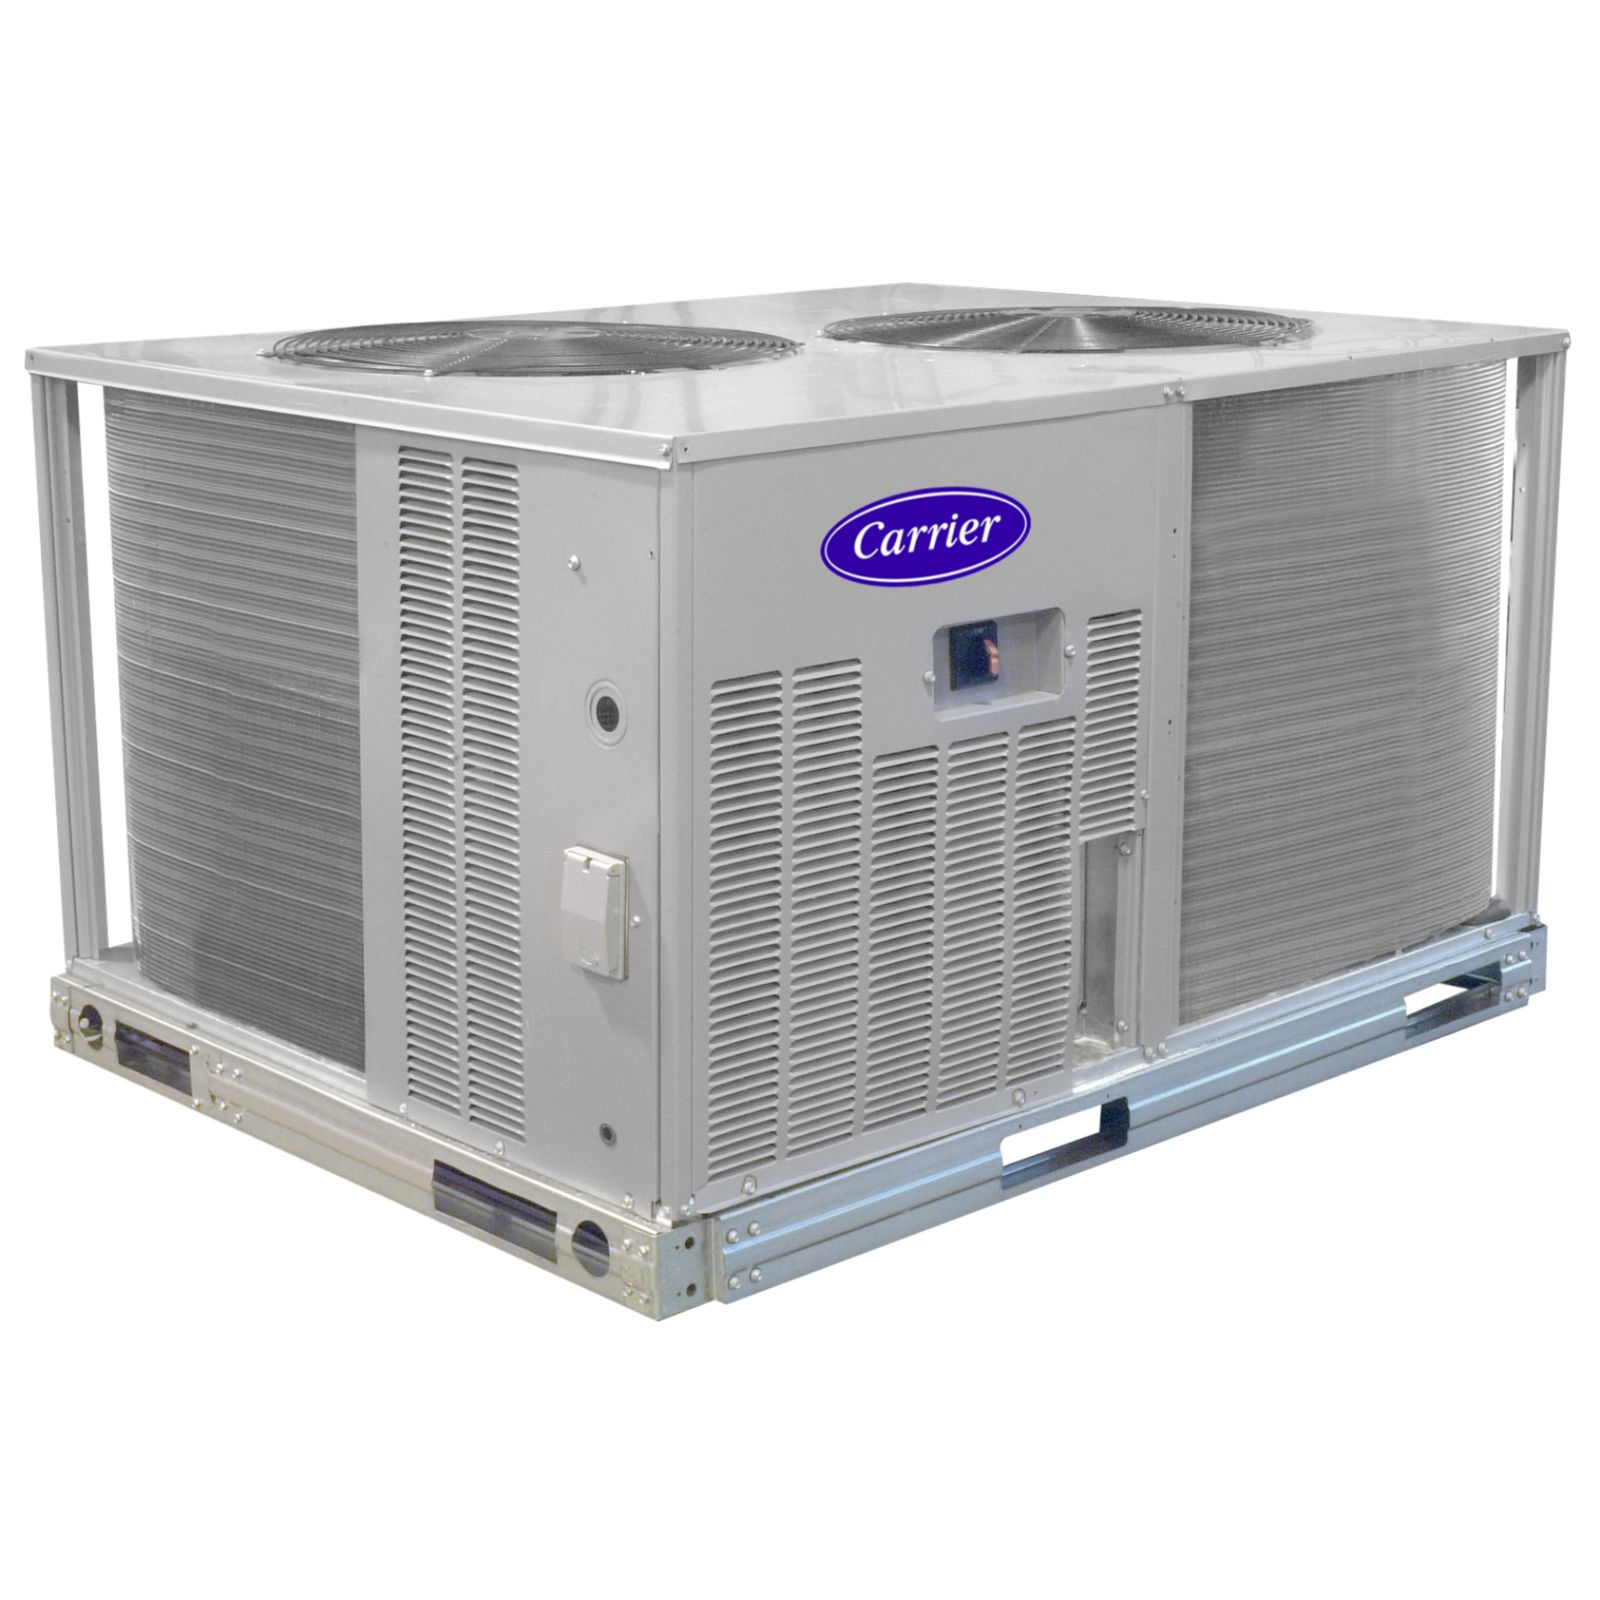 Carrier Gemini 7 5 Ton Commercial Air Cooled Condensing Unit